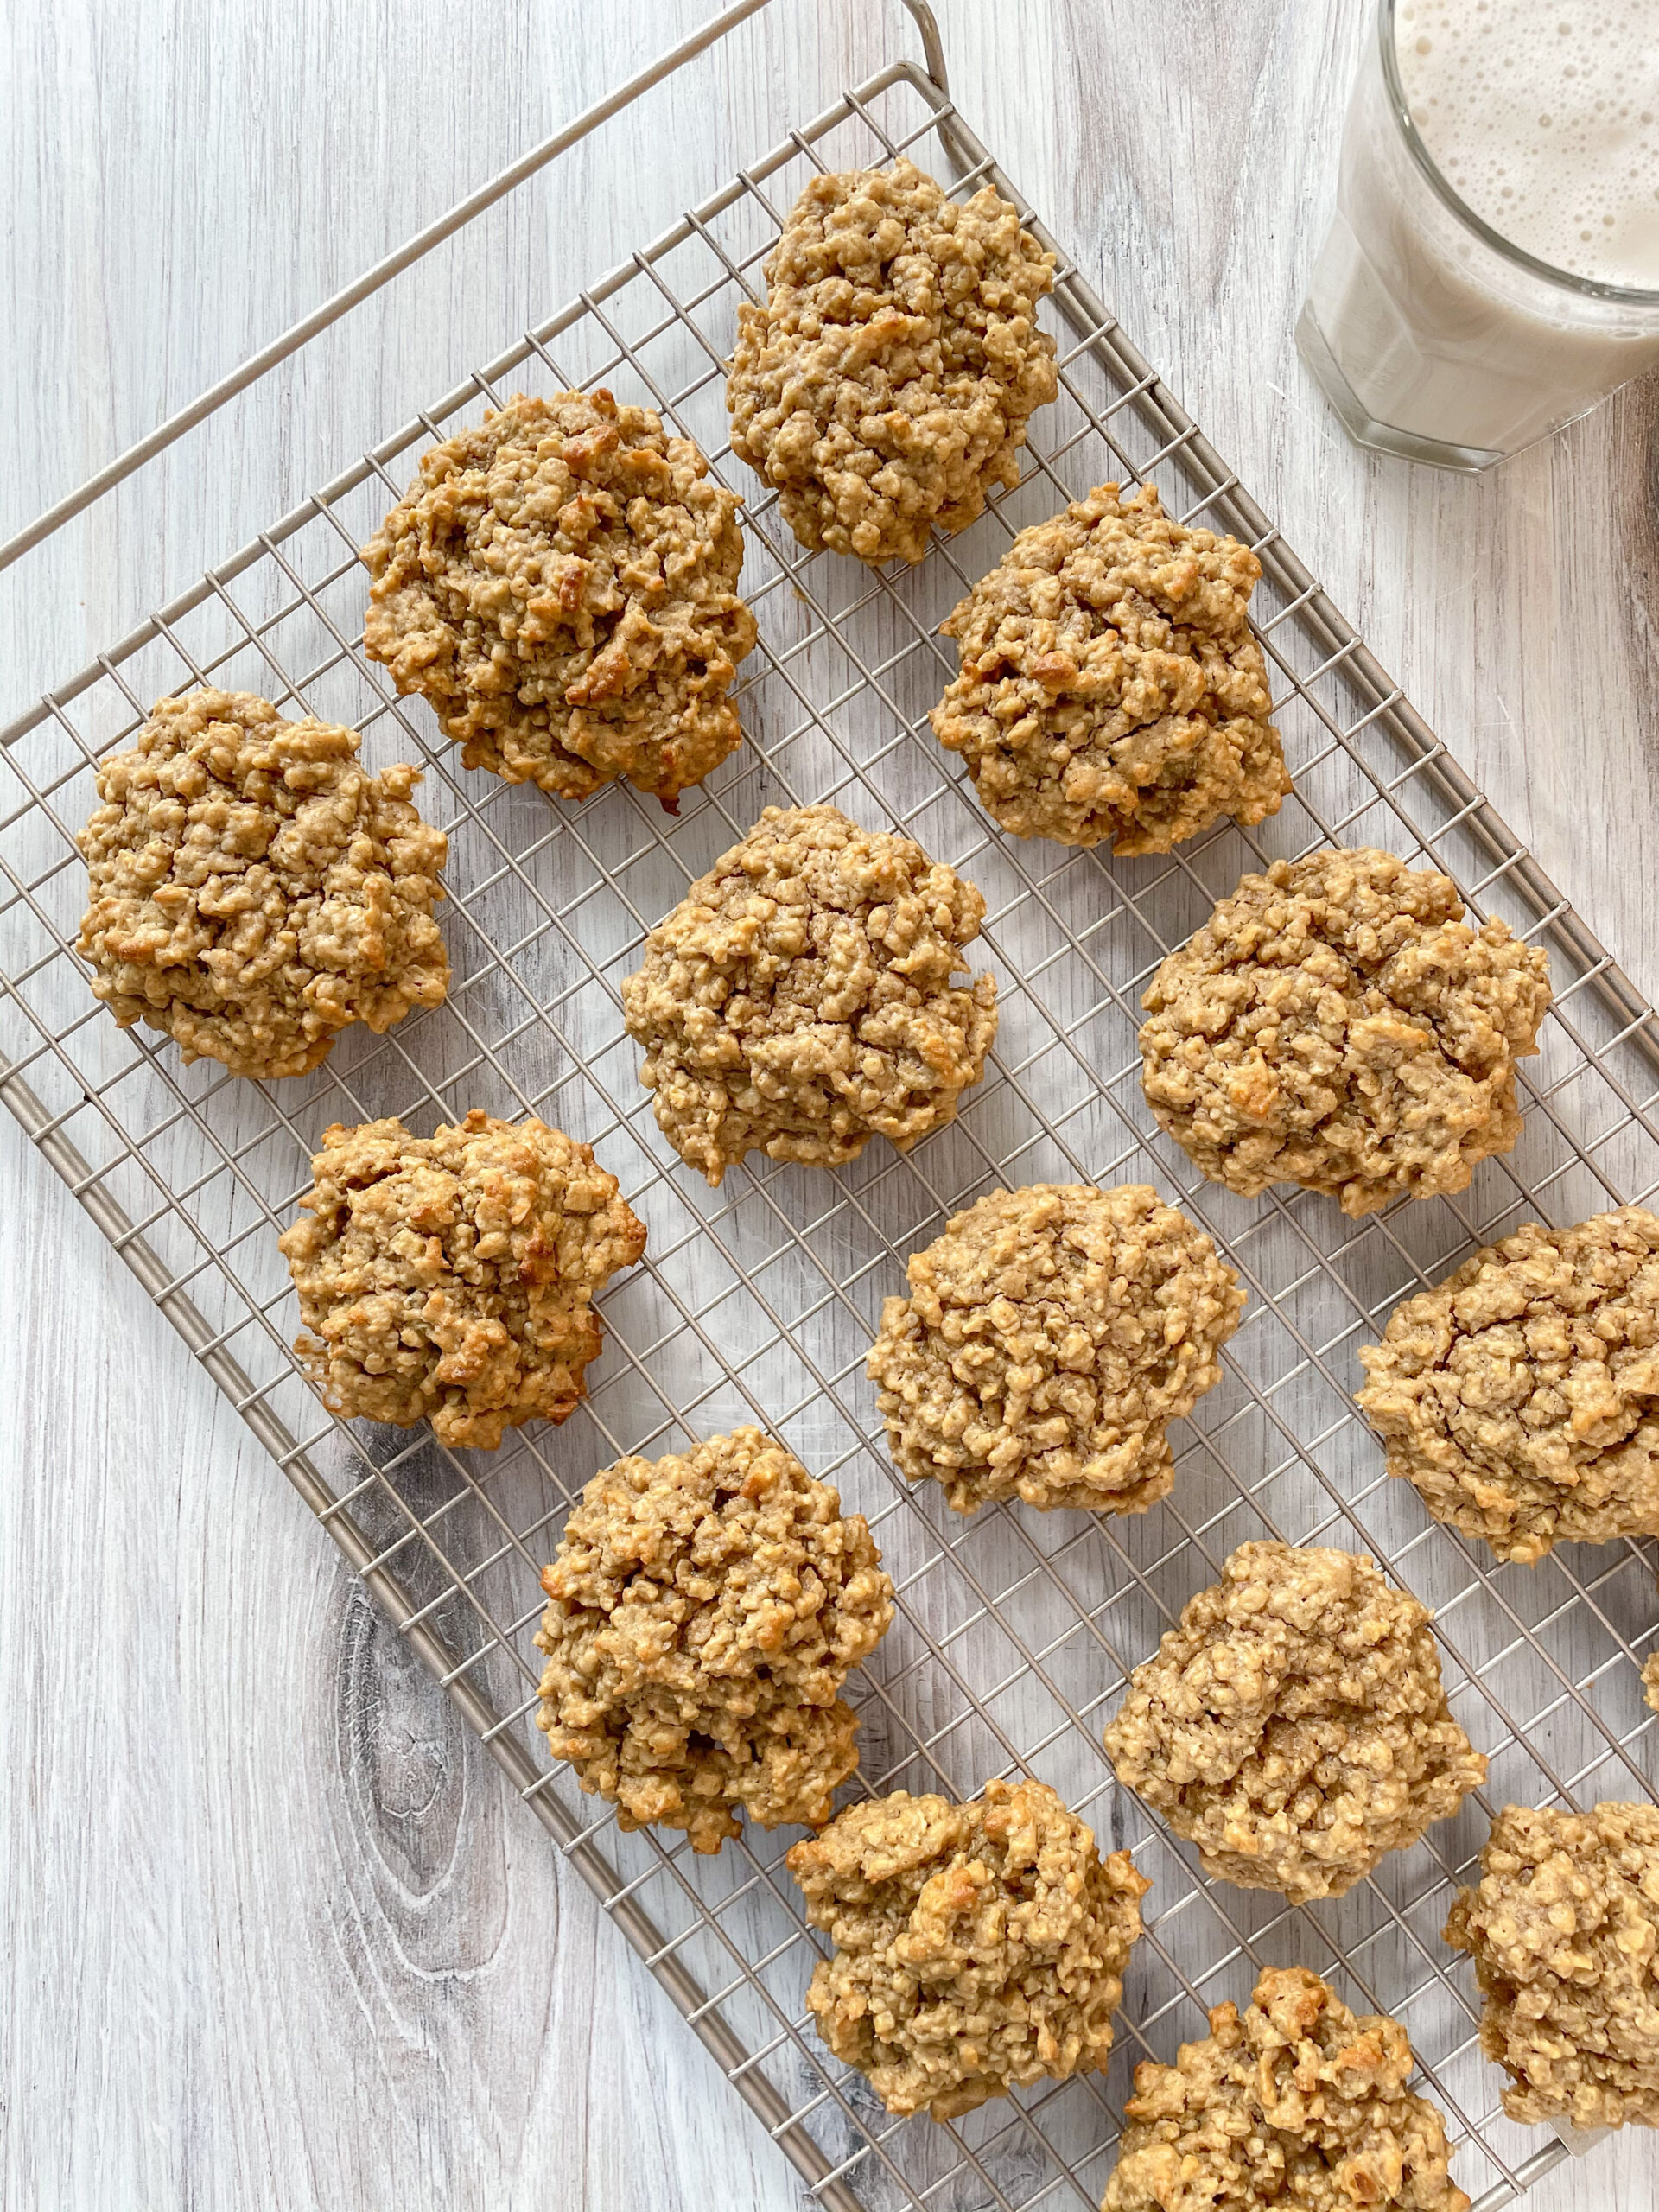 The Best Oatmeal Peanut Butter Cookies